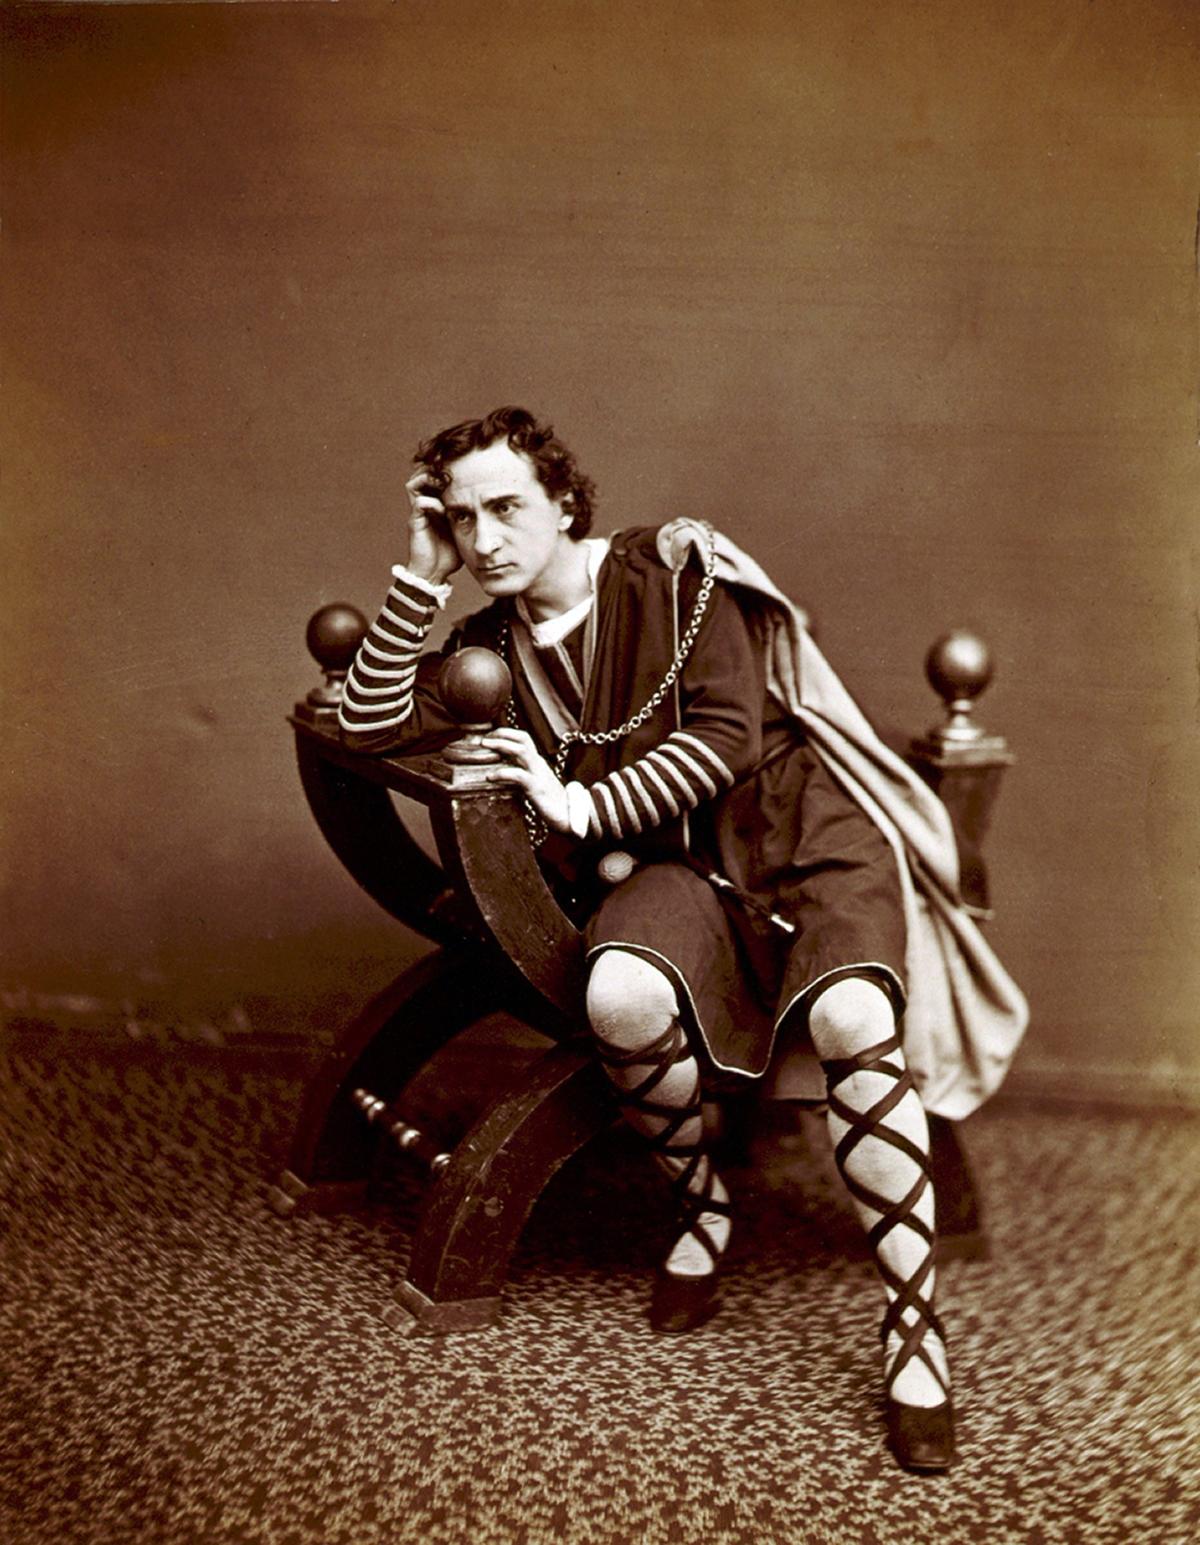 American actor Edwin Booth (1833–1893) was considered the greatest Shakespearean actor in 19th-century America. Here he is dressed as Hamlet, his most famous role, circa 1870, photographed by J. Guerney. (Everett Collection/Shutterstock)